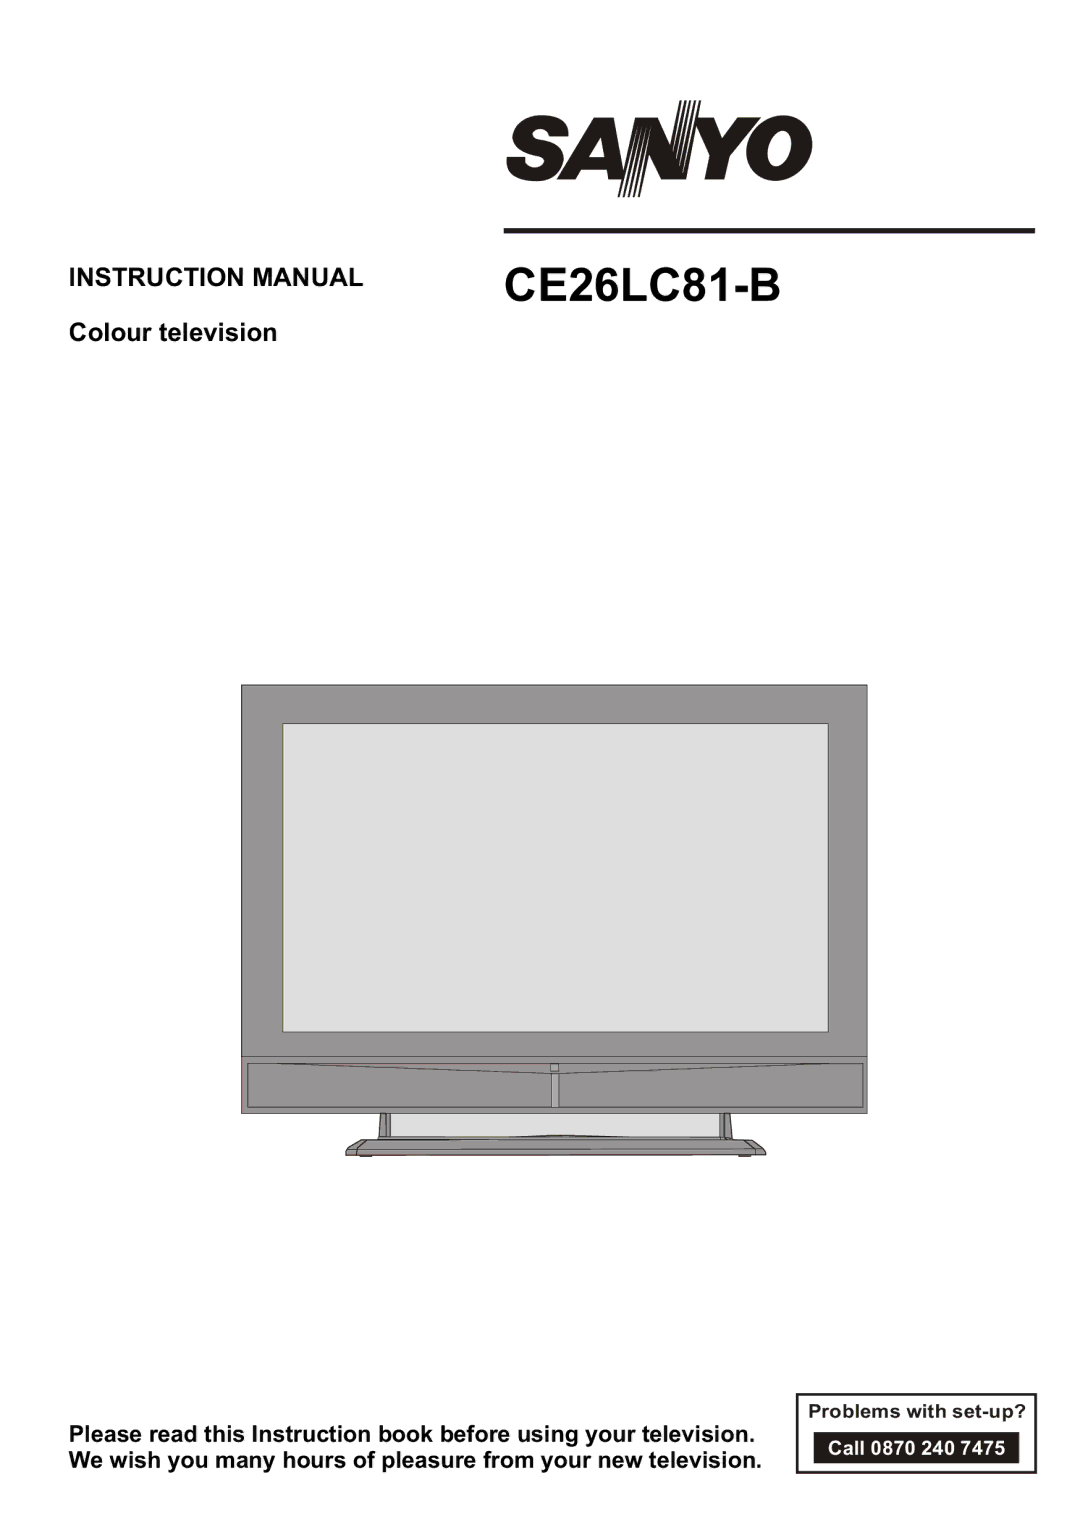 Sanyo CE26LC81-B instruction manual Colour television 